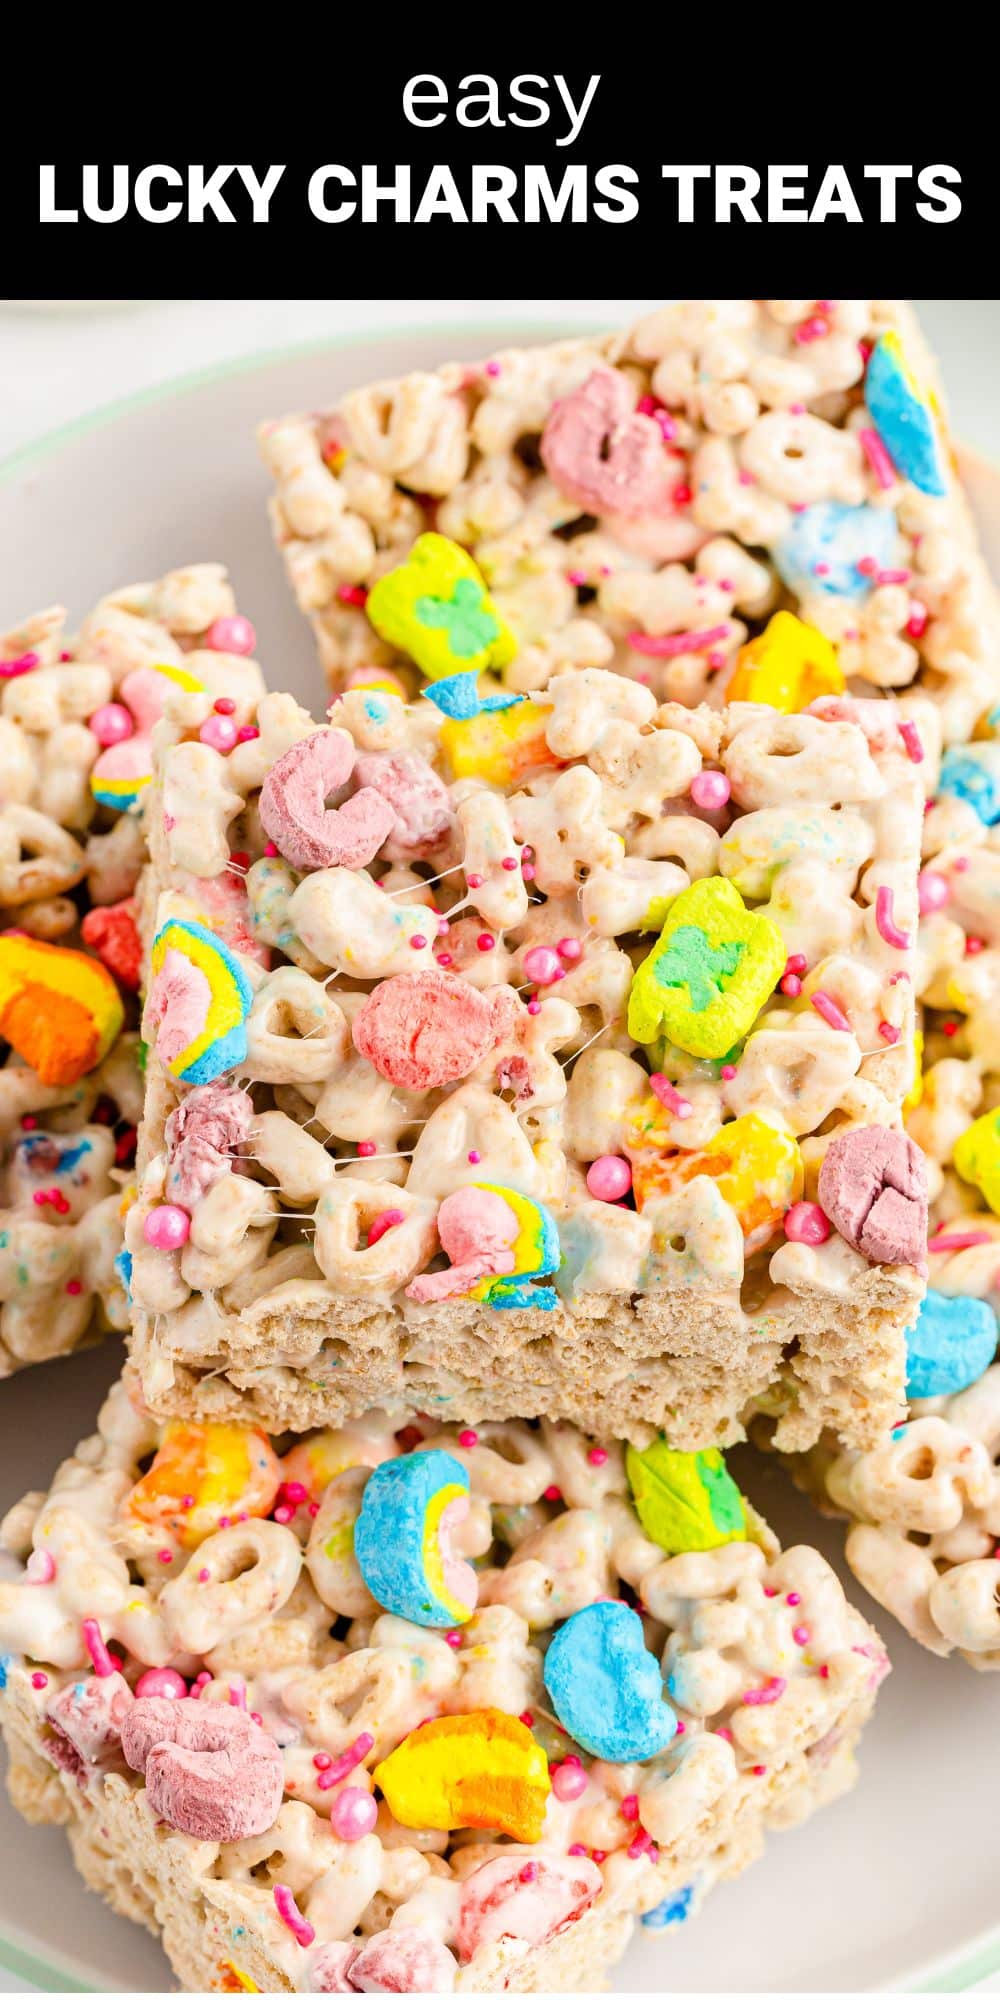 These Lucky Charms treats are a perfect option for a fun and easy treat to make with the kids. Not only are they easy to make, but they are also loaded with marshmallows and flavor.